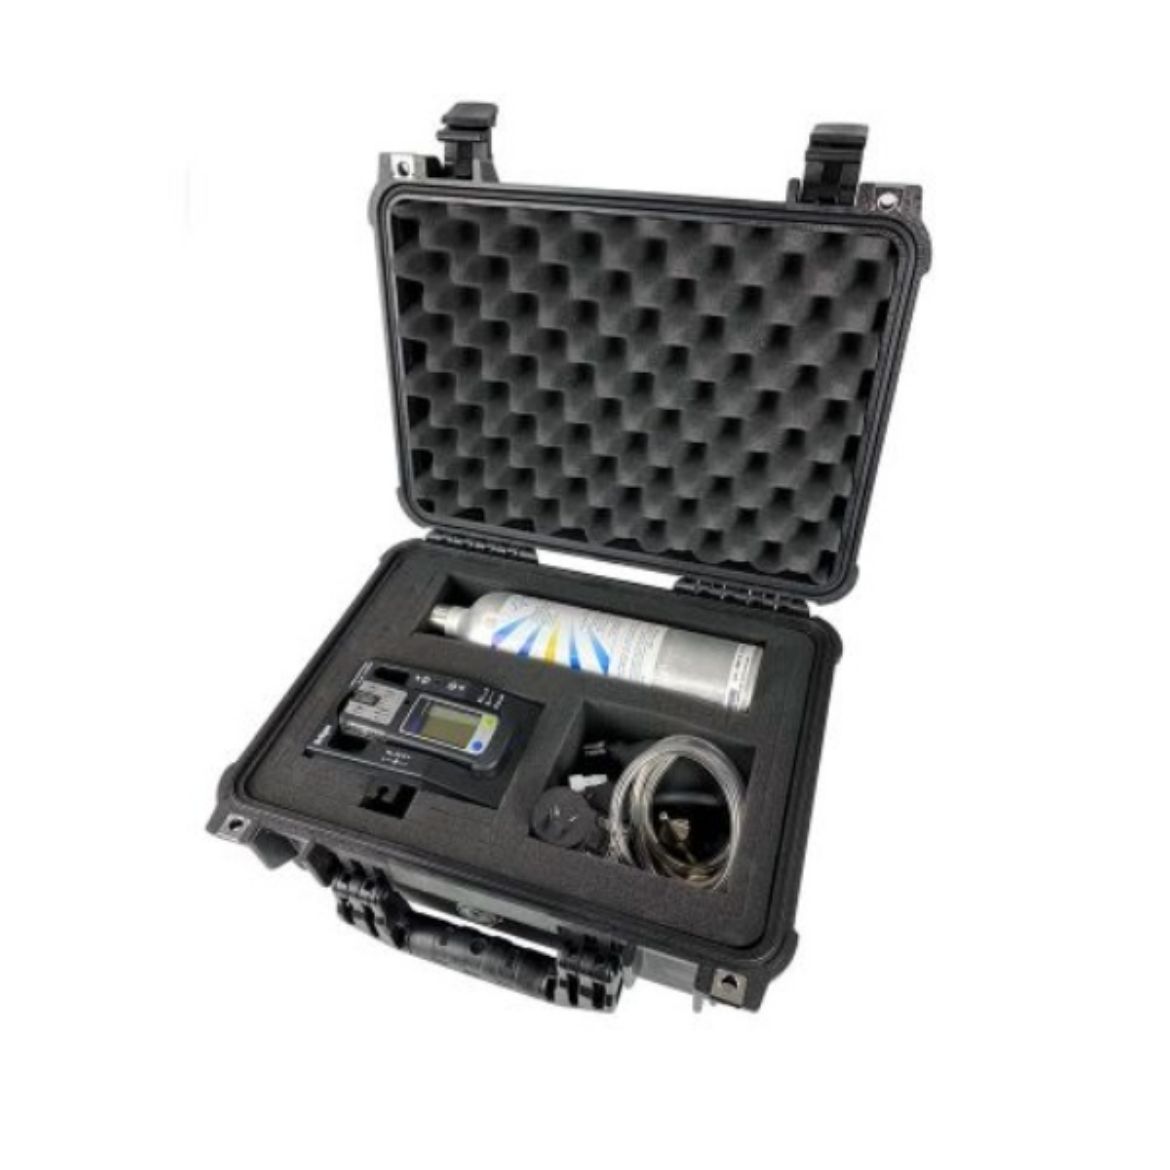 Picture of X-AM 2500 BASIC BUMPTEST KIT WITH CALIBRATION GAS